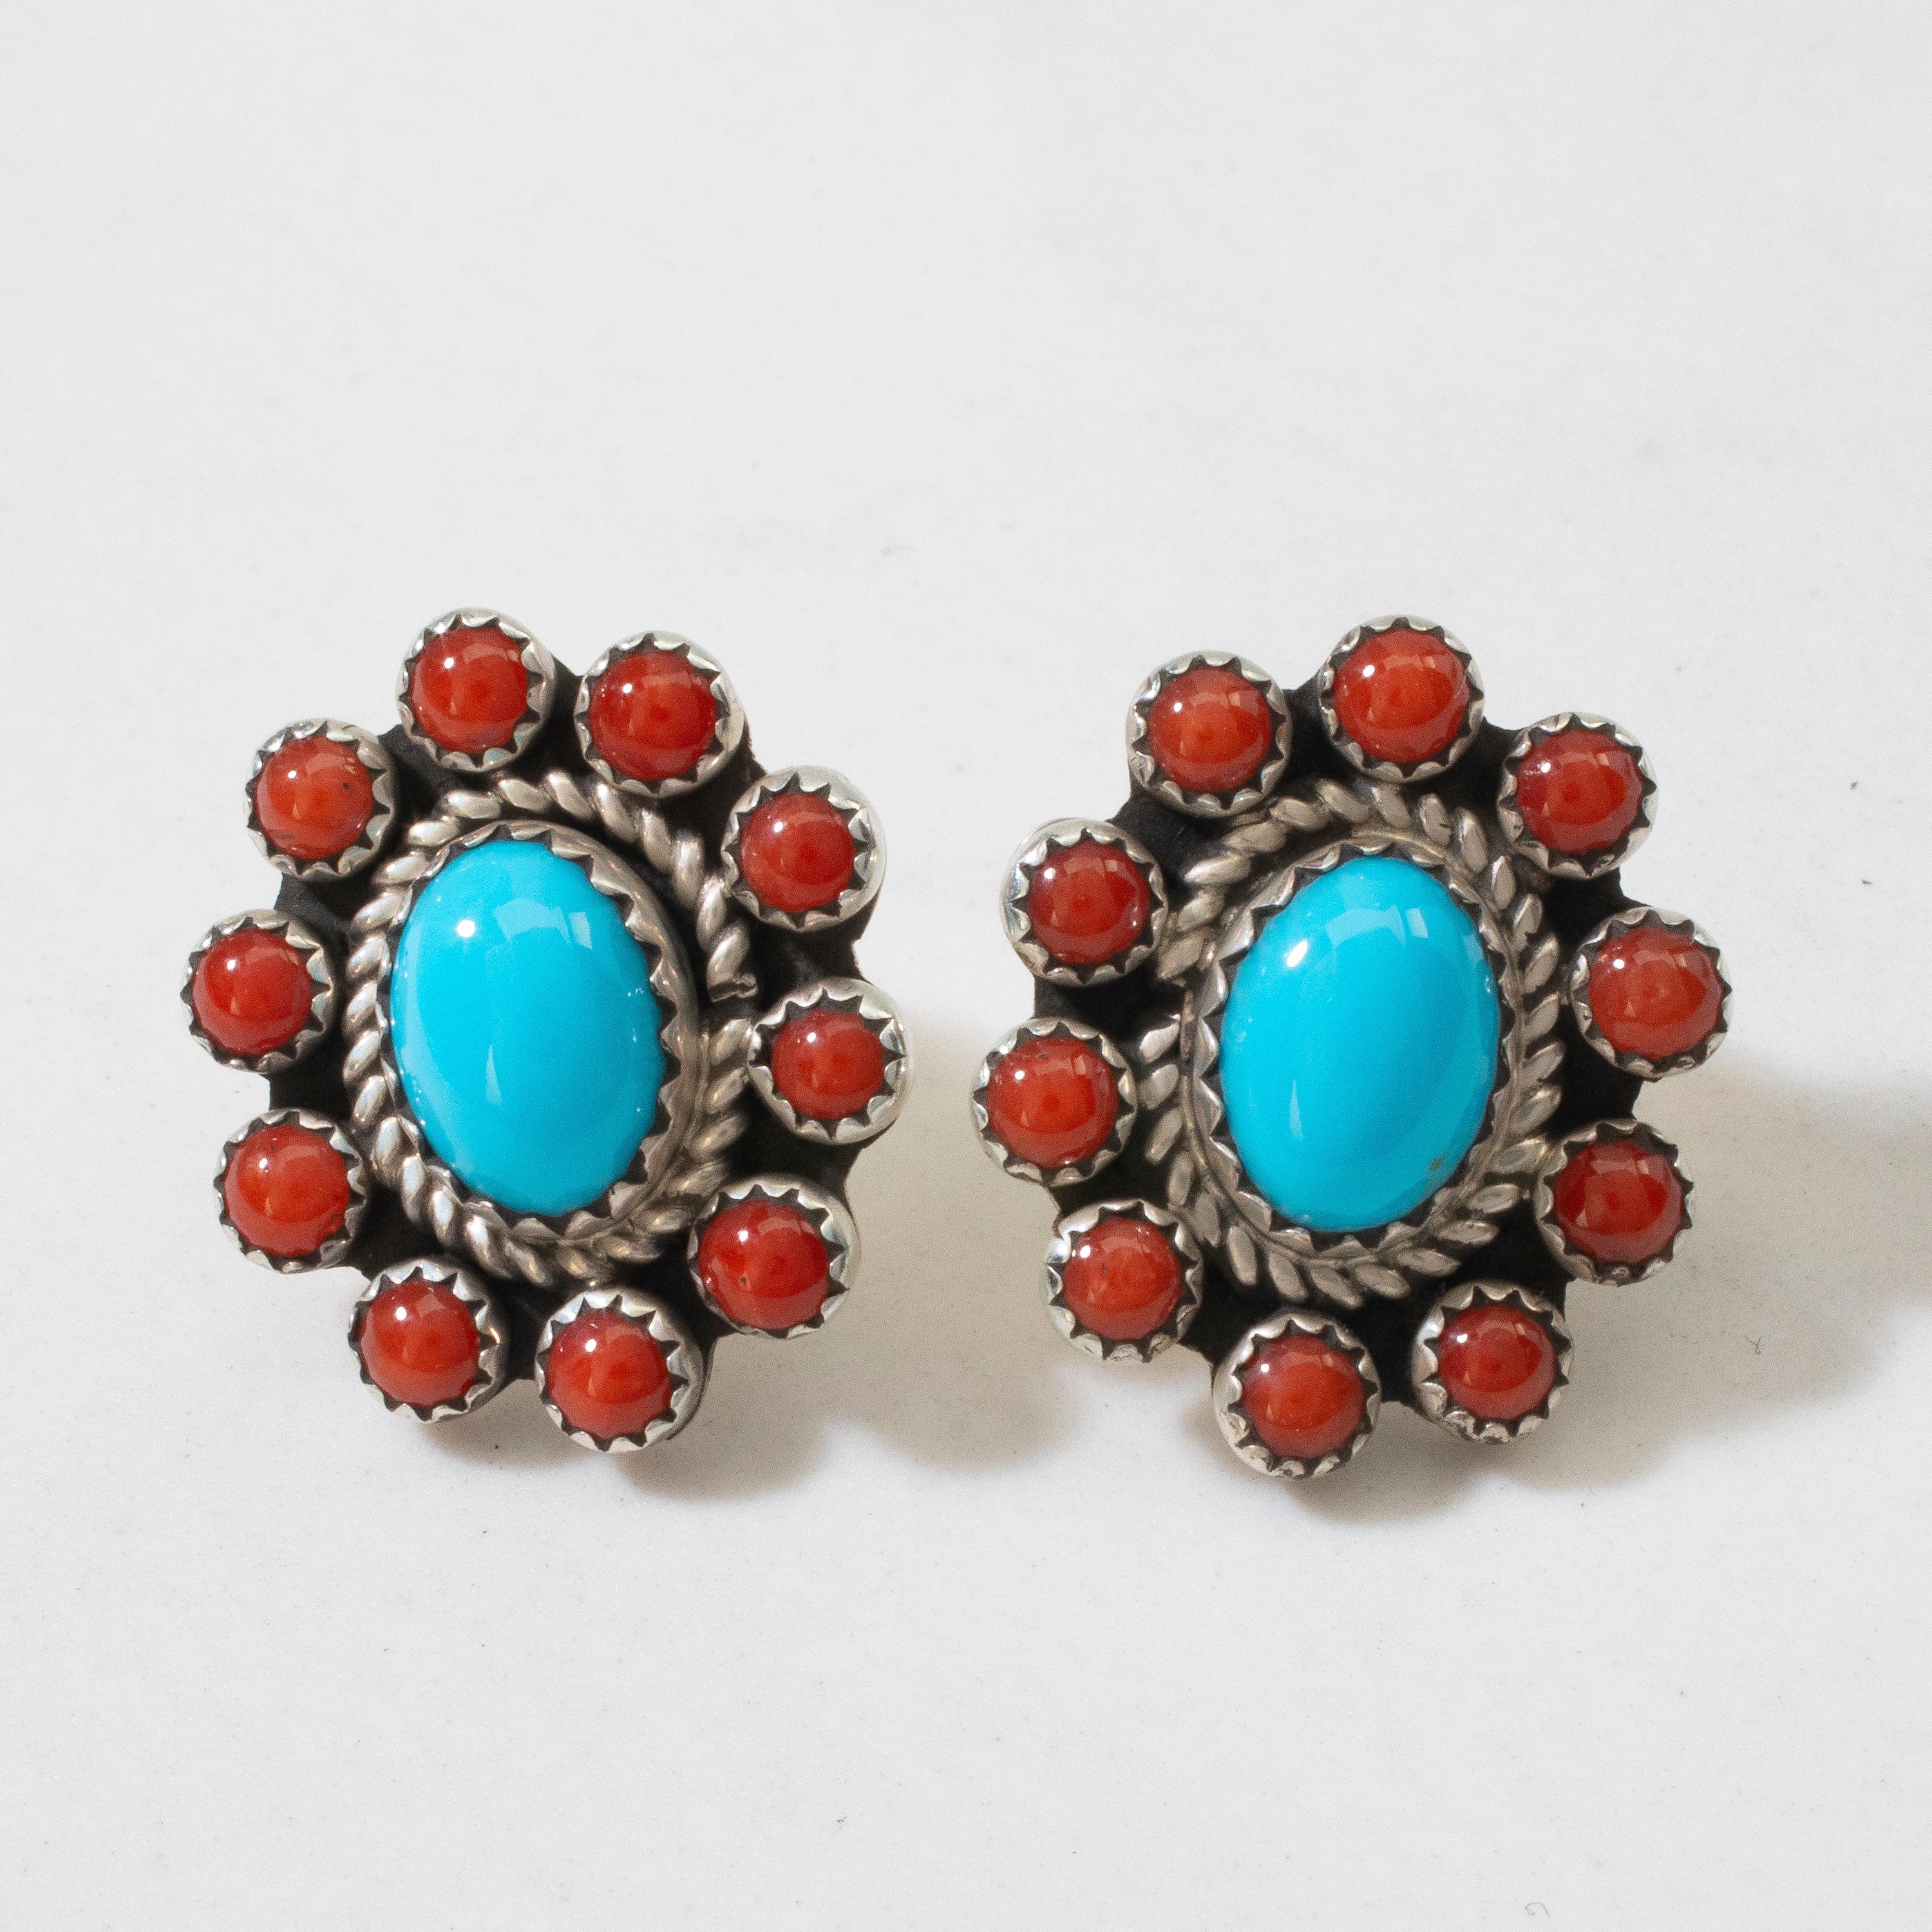 Kalifano Native American Jewelry Sleeping Beauty Turquoise & Red Coral Flower Navajo USA Native American Made 925 Sterling Silver Earrings with Stud Backing NAE400.042